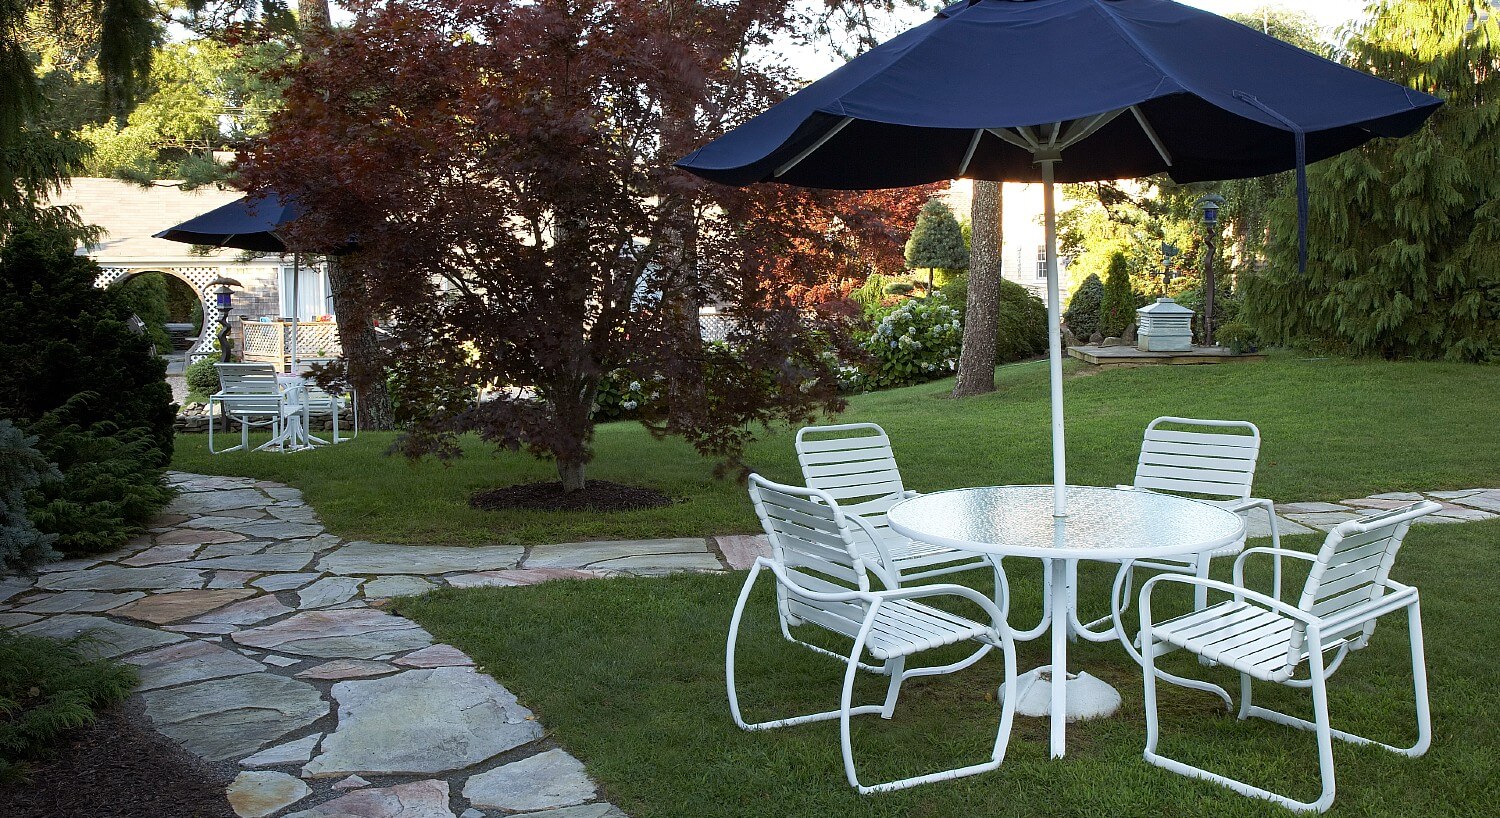 Outdoor lawn area with stone sidewalks and white patio table wth four chairs and blue umbrella